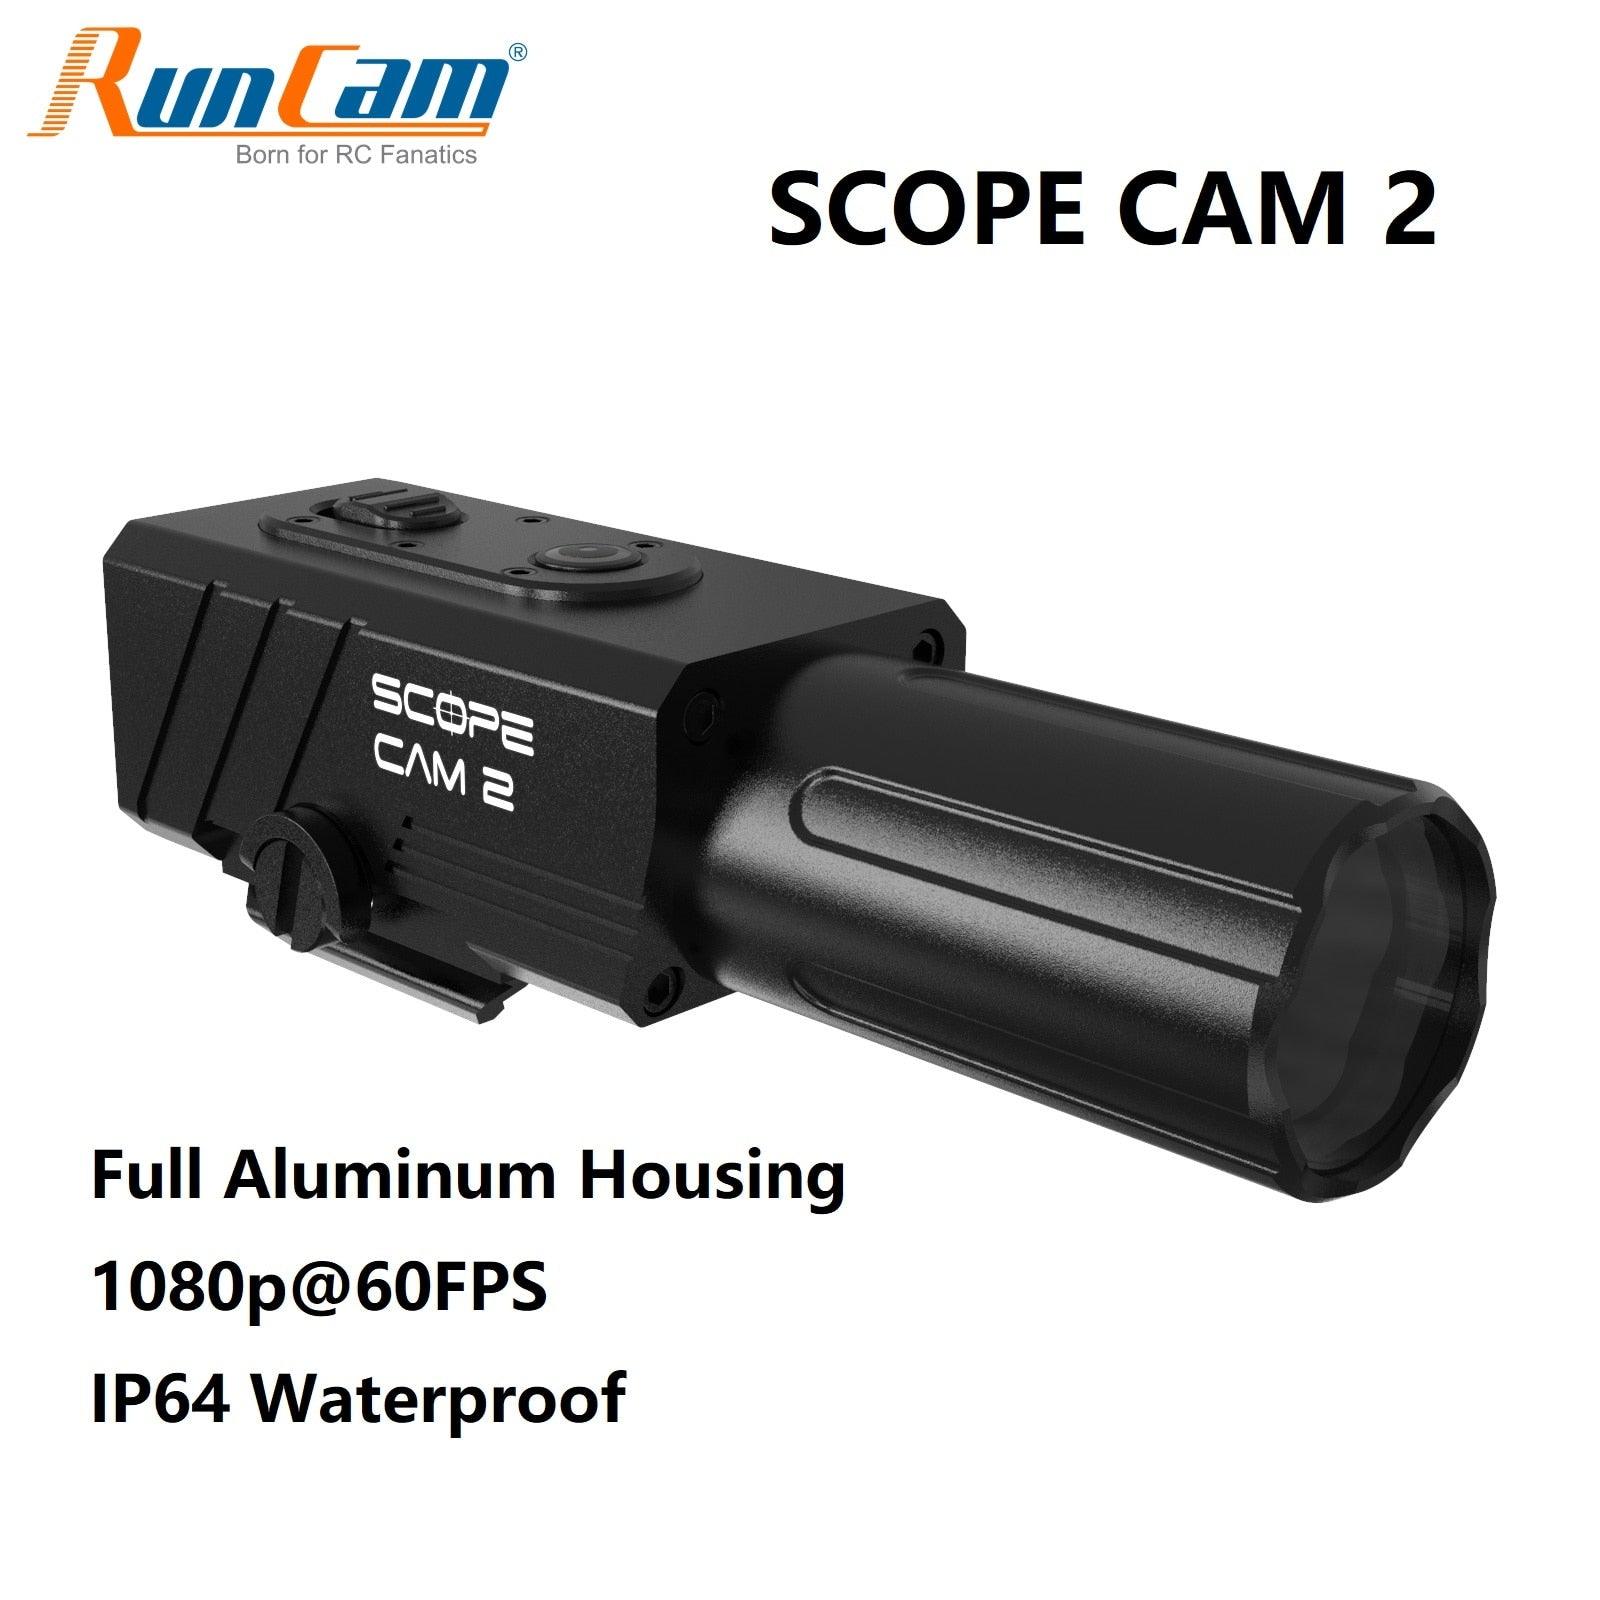 RunCam Scope Cam Lite 1080P HD Built-in WiFi APP Scopecam 2 Military Airsoft Tactical Paintbal Hunting Action Zoom Camera - RCDrone